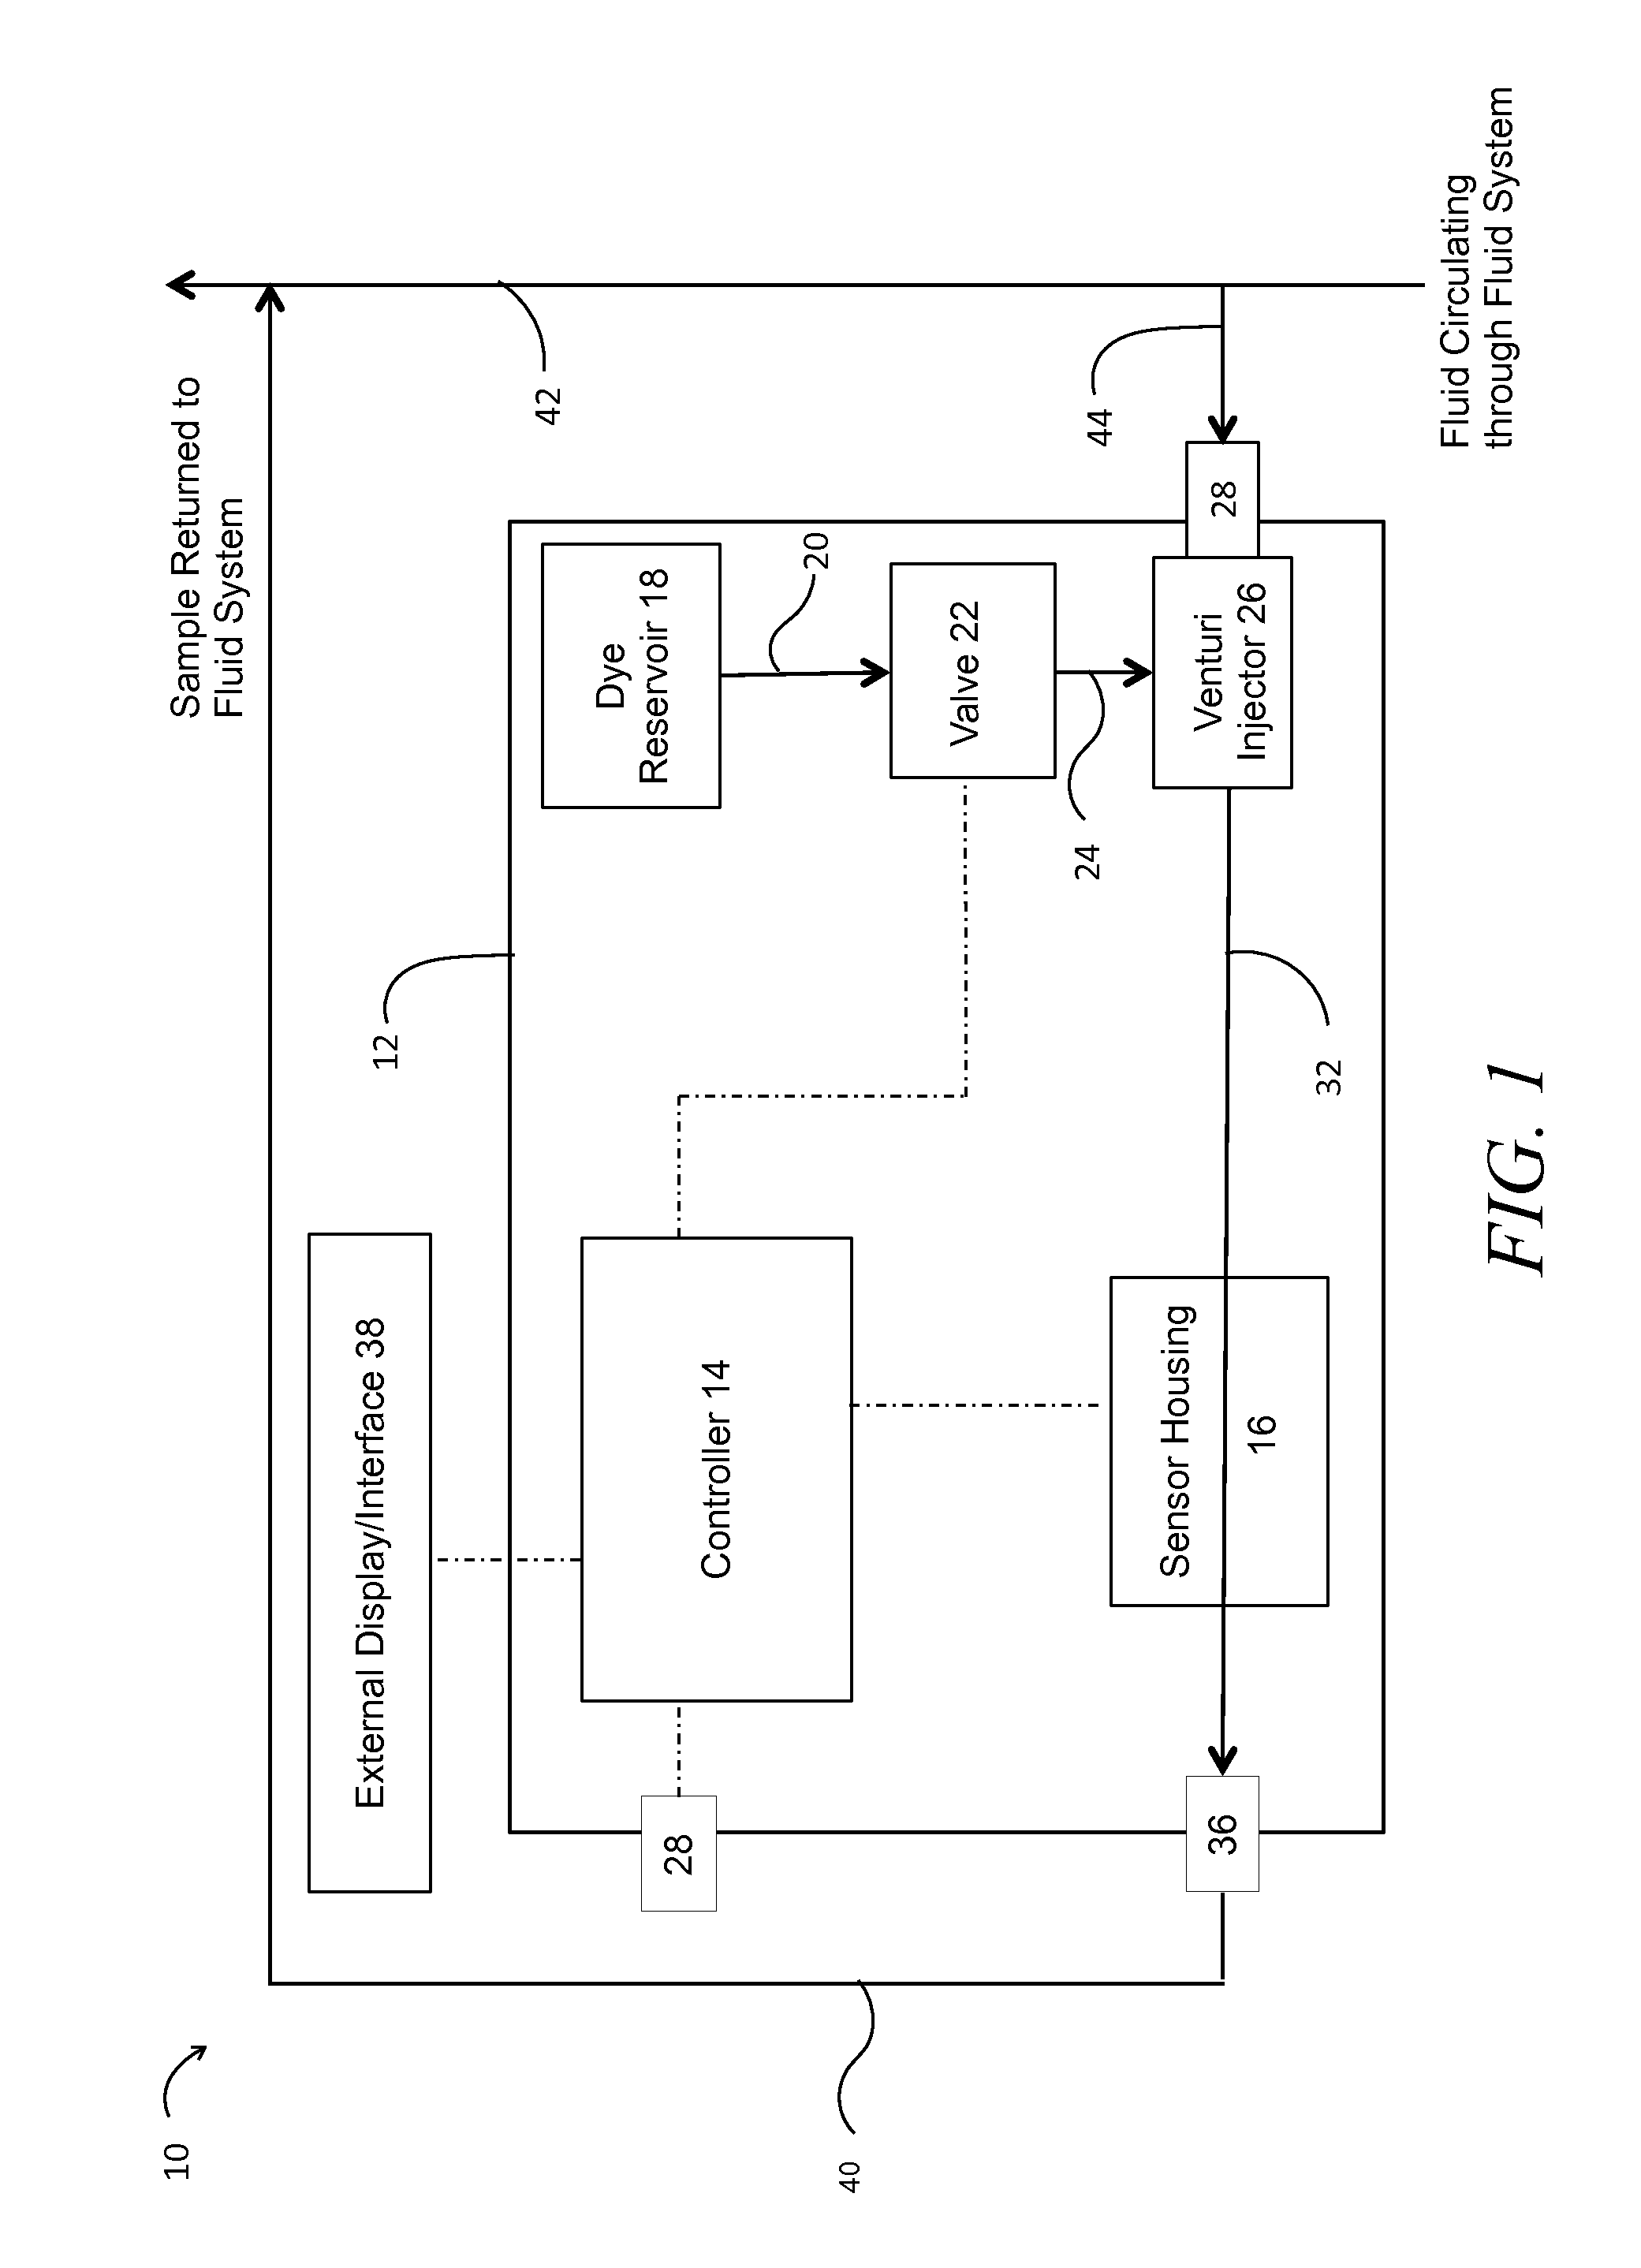 System and Method for Detecting Biofilm Growth in Water Systems